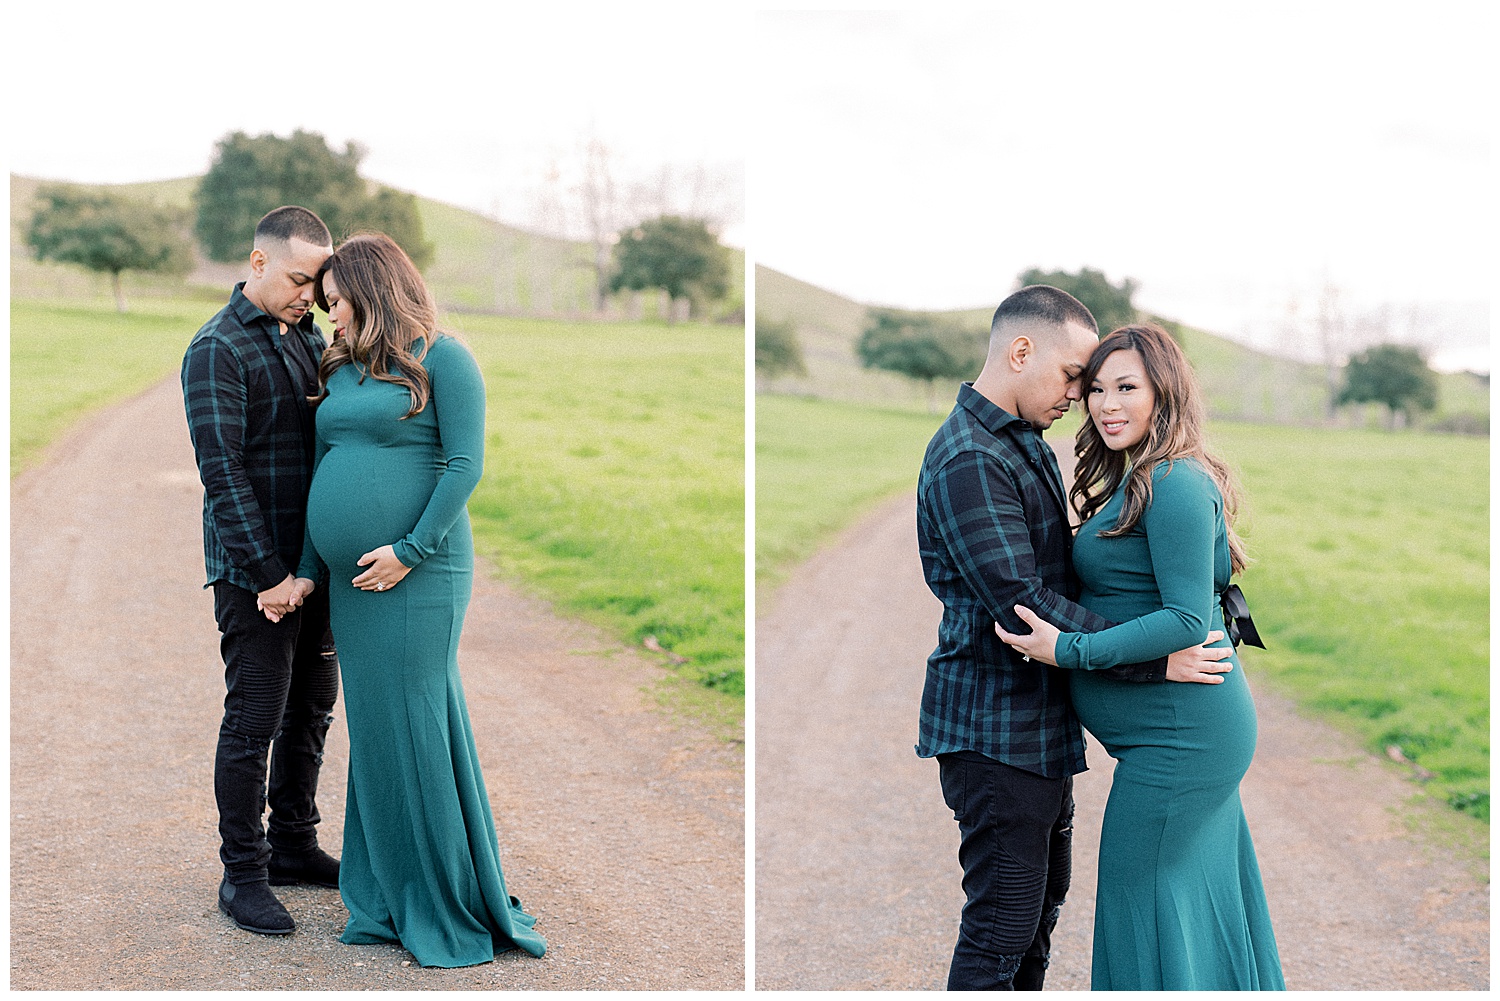 san francisco wedding and portrait photographer doing a maternity session in garin park fremont california, 